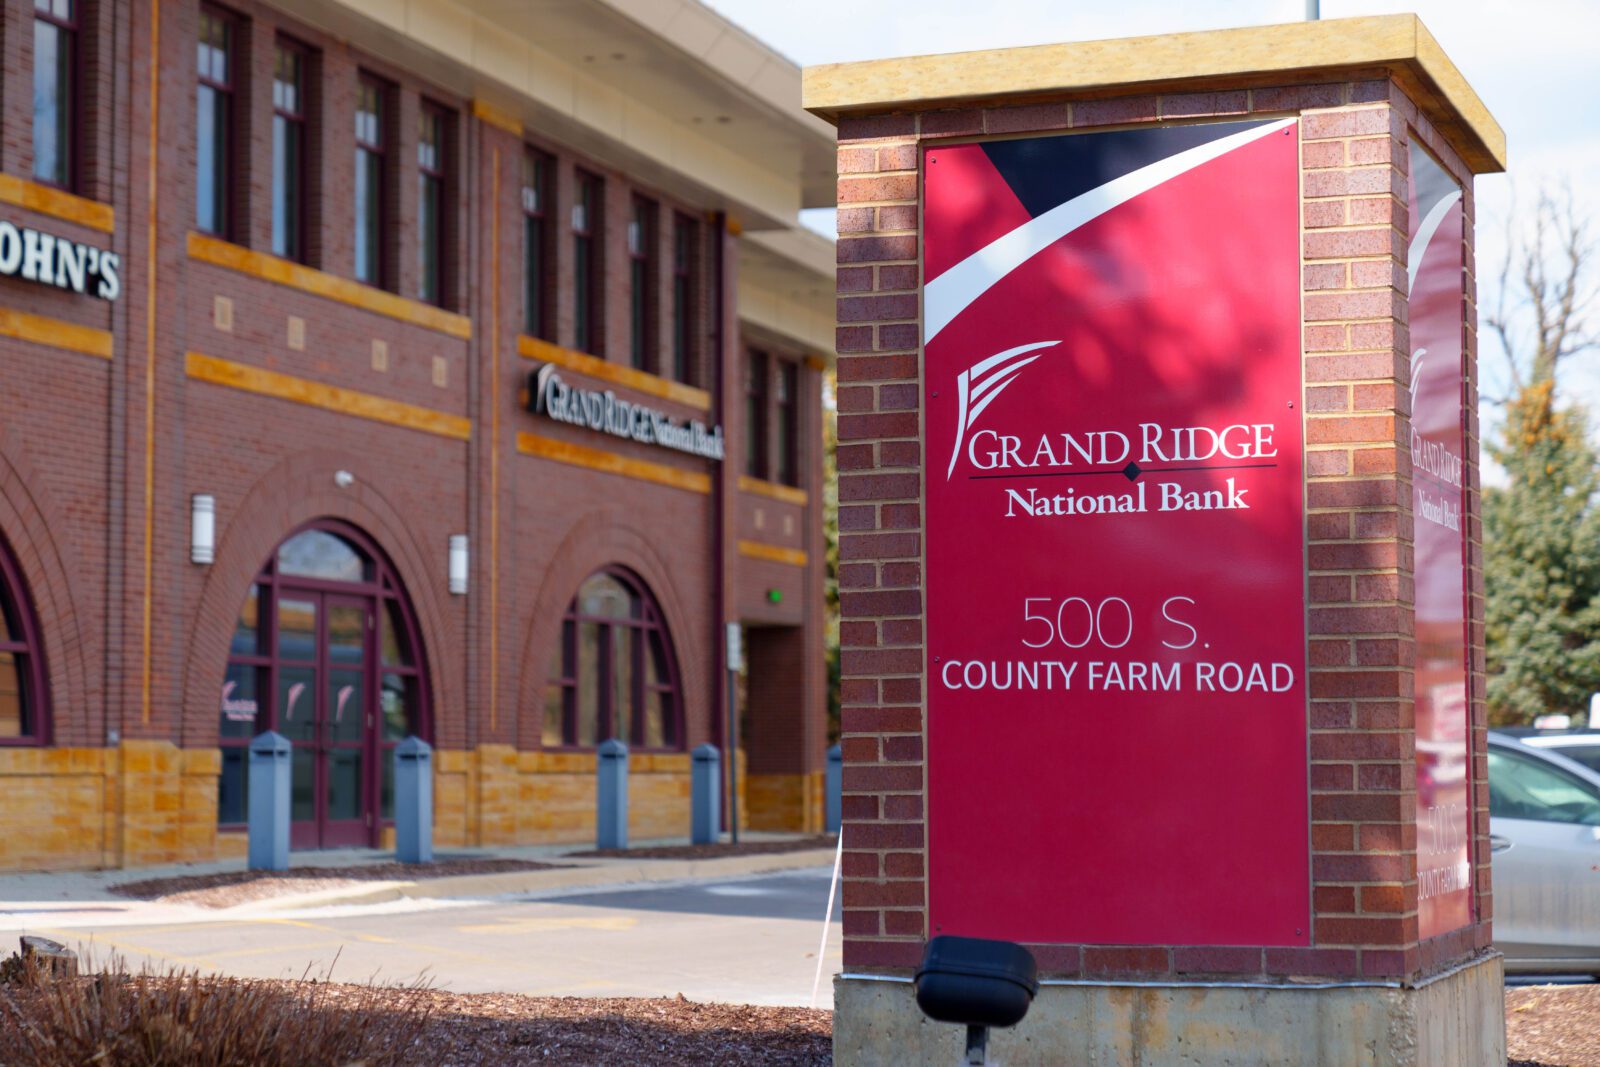 grand ridge national bank signage outside the office building